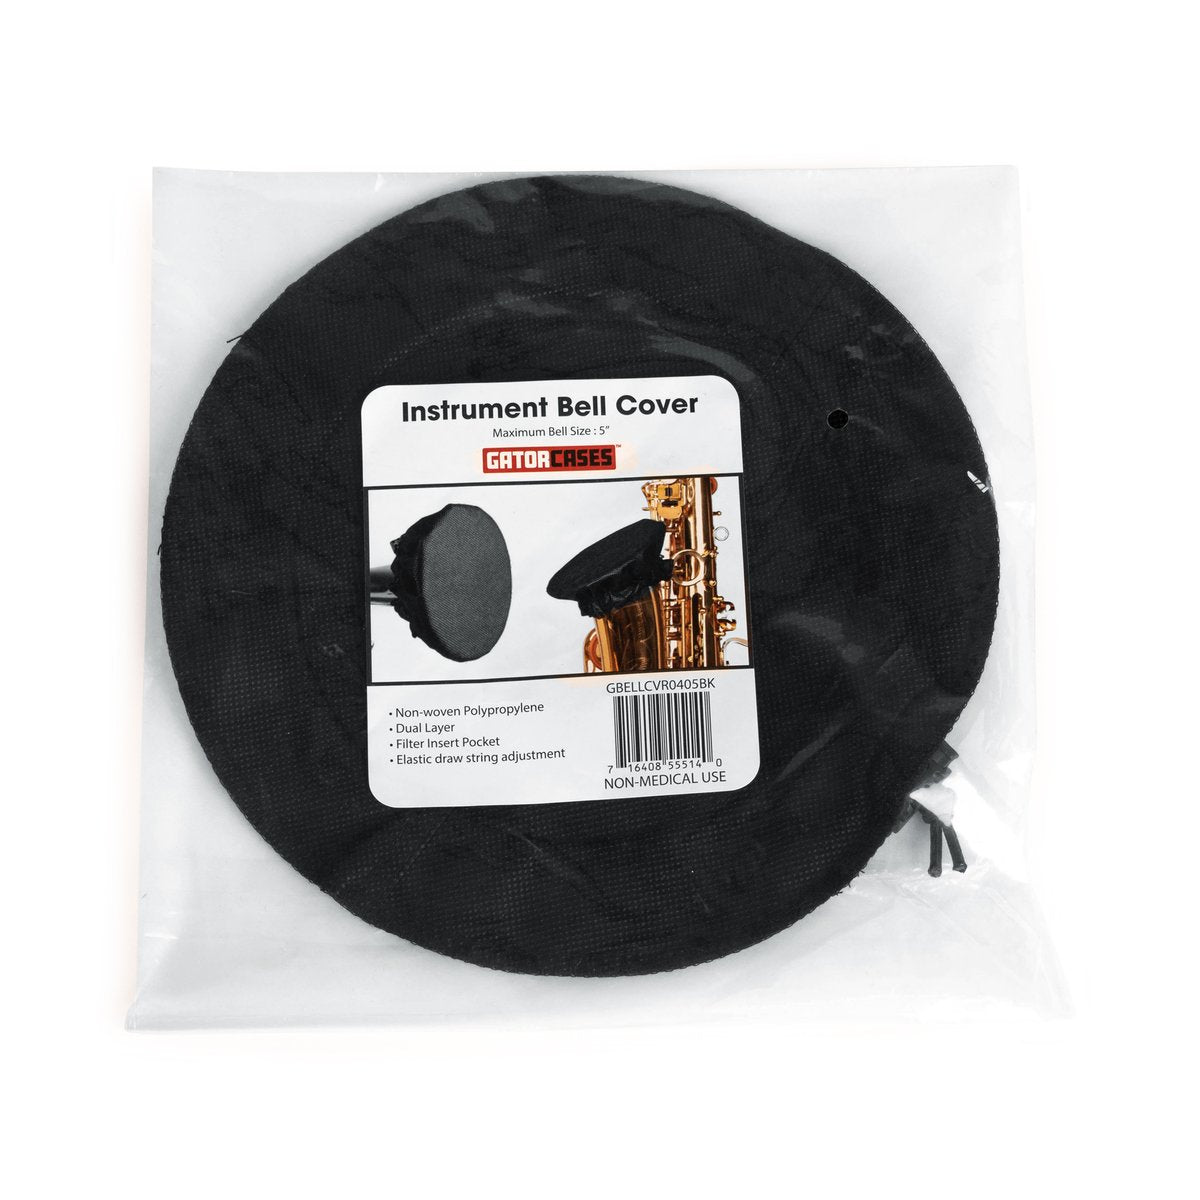 Wind Instrument Double-Layer Cover for Bell Sizes Ranging from 30 to 32-Inches – Black Color